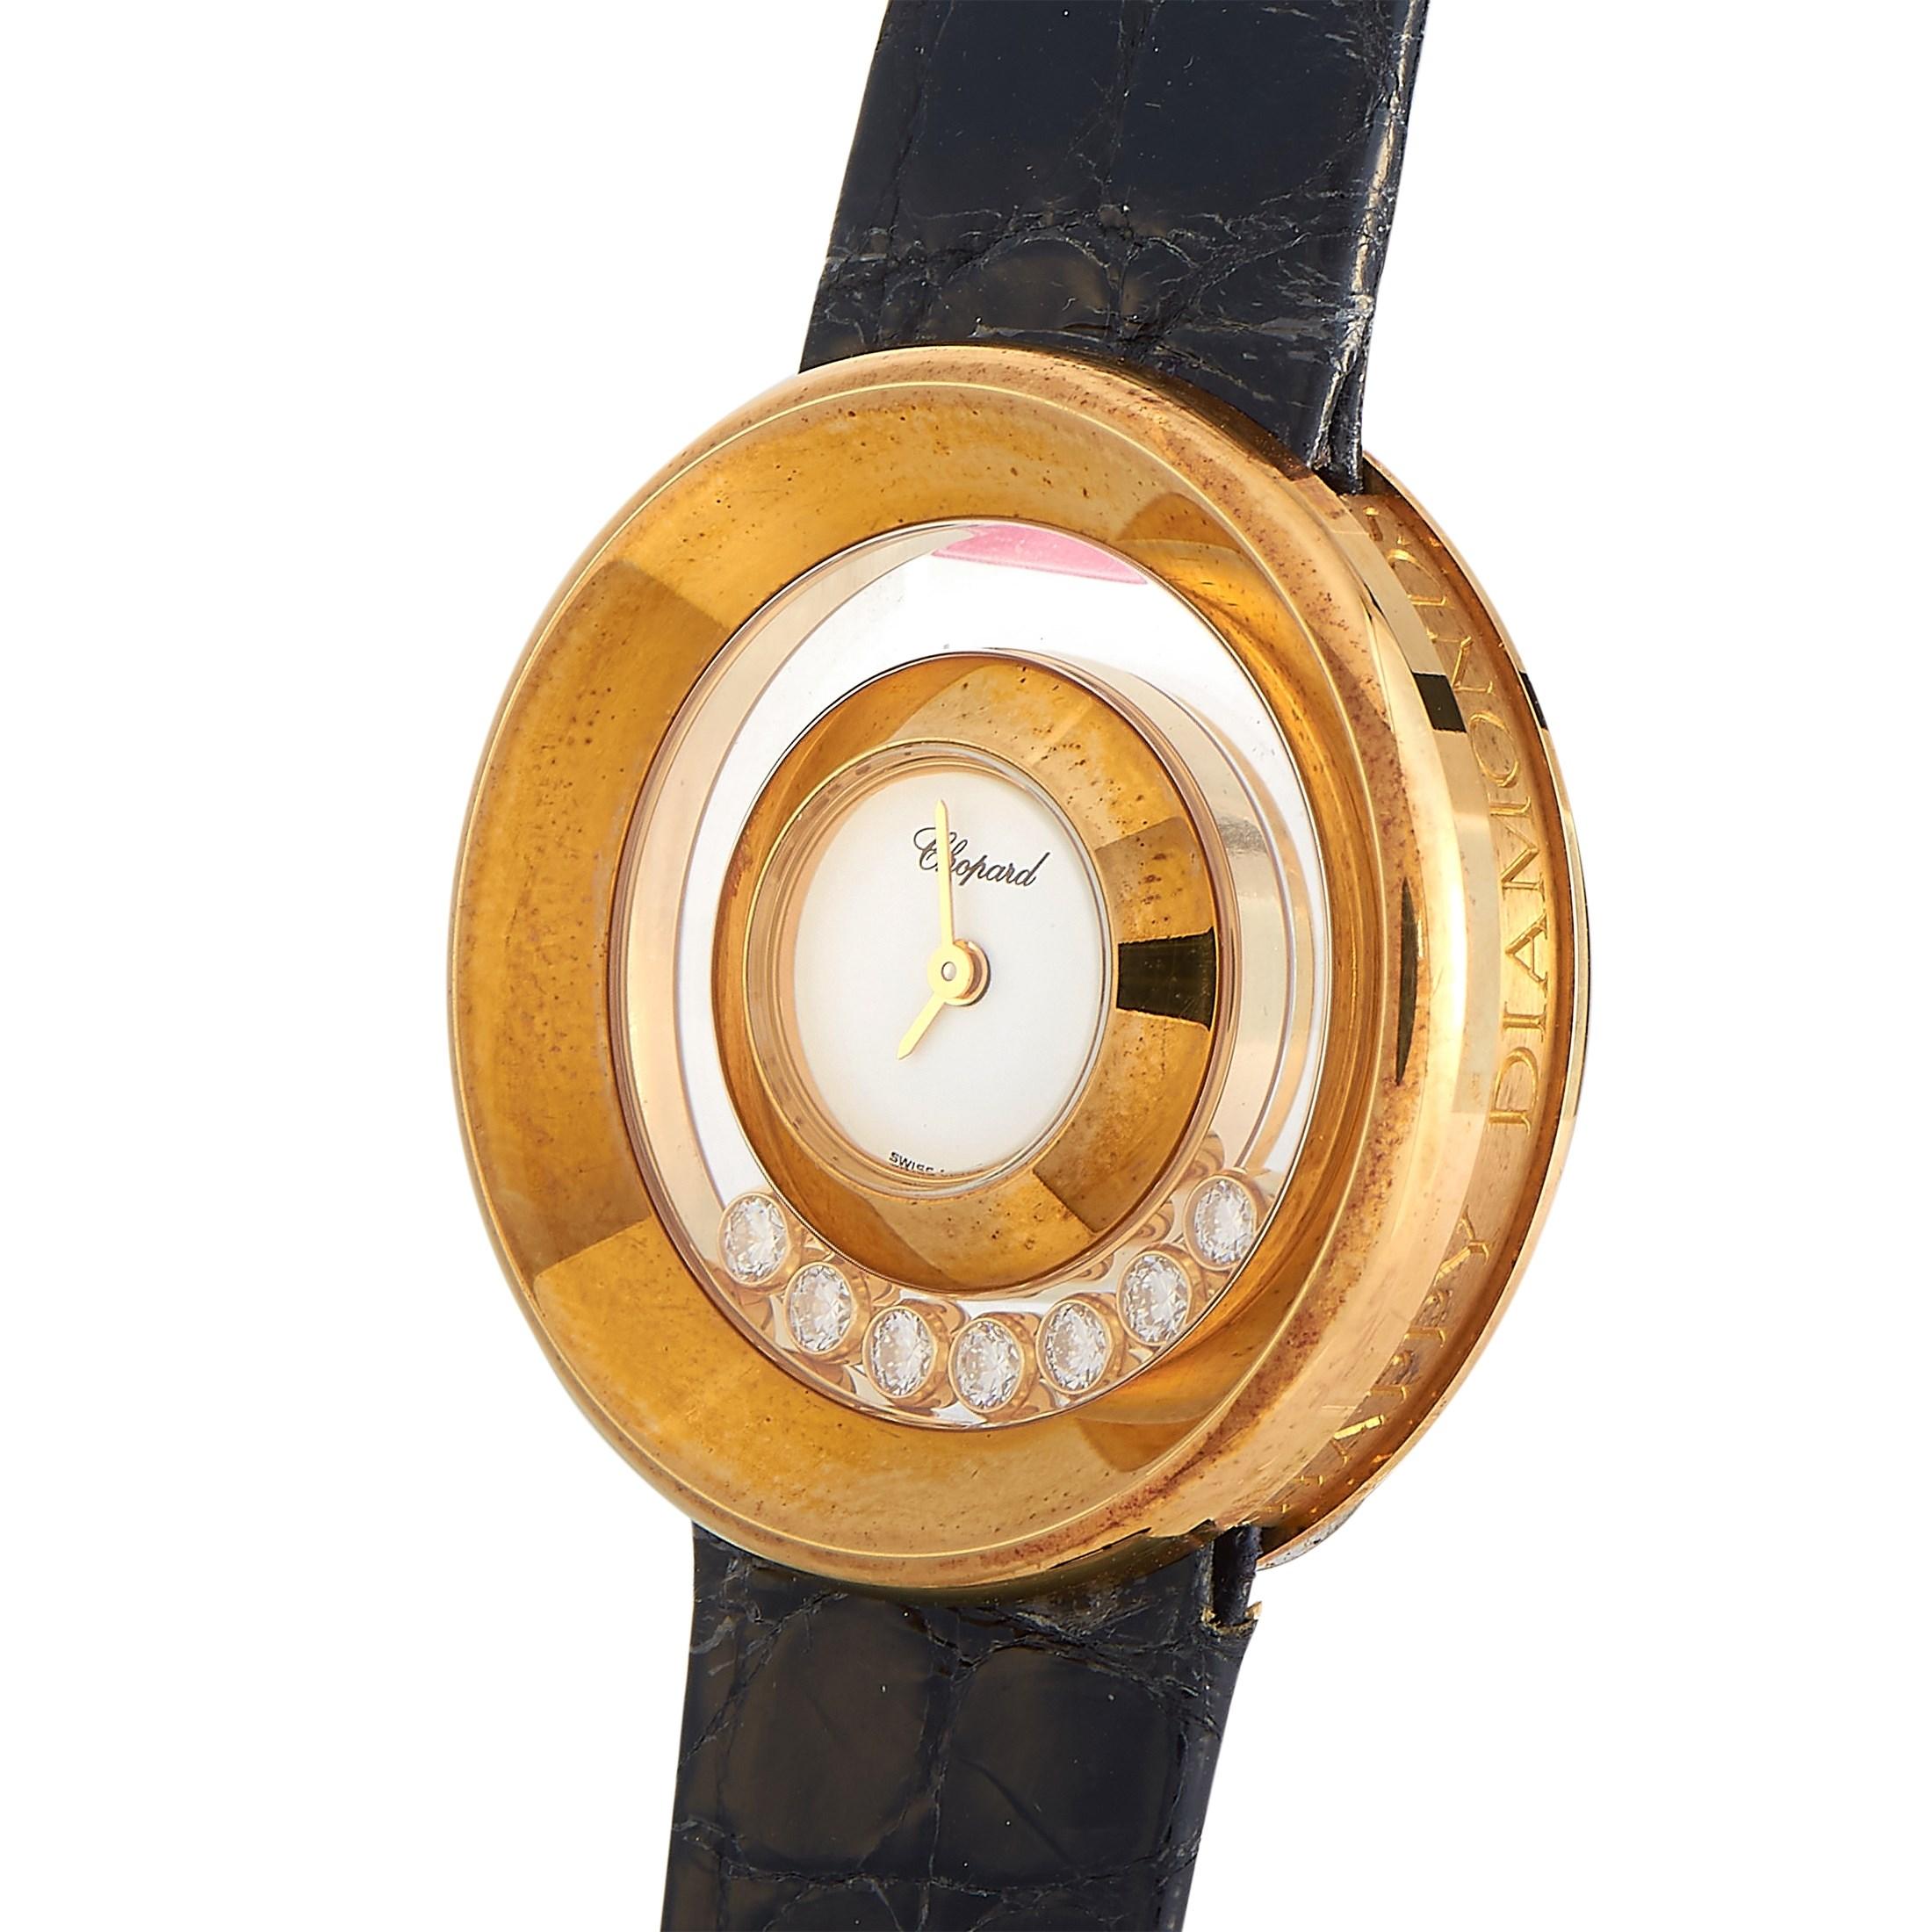 The Chopard Happy Diamonds Ladies Watch, reference number 20/6923, is a unique luxury timepiece that will continually capture your imagination.

An elegant 18K yellow gold case is the first thing you’ll notice about this stunning design - but it’s